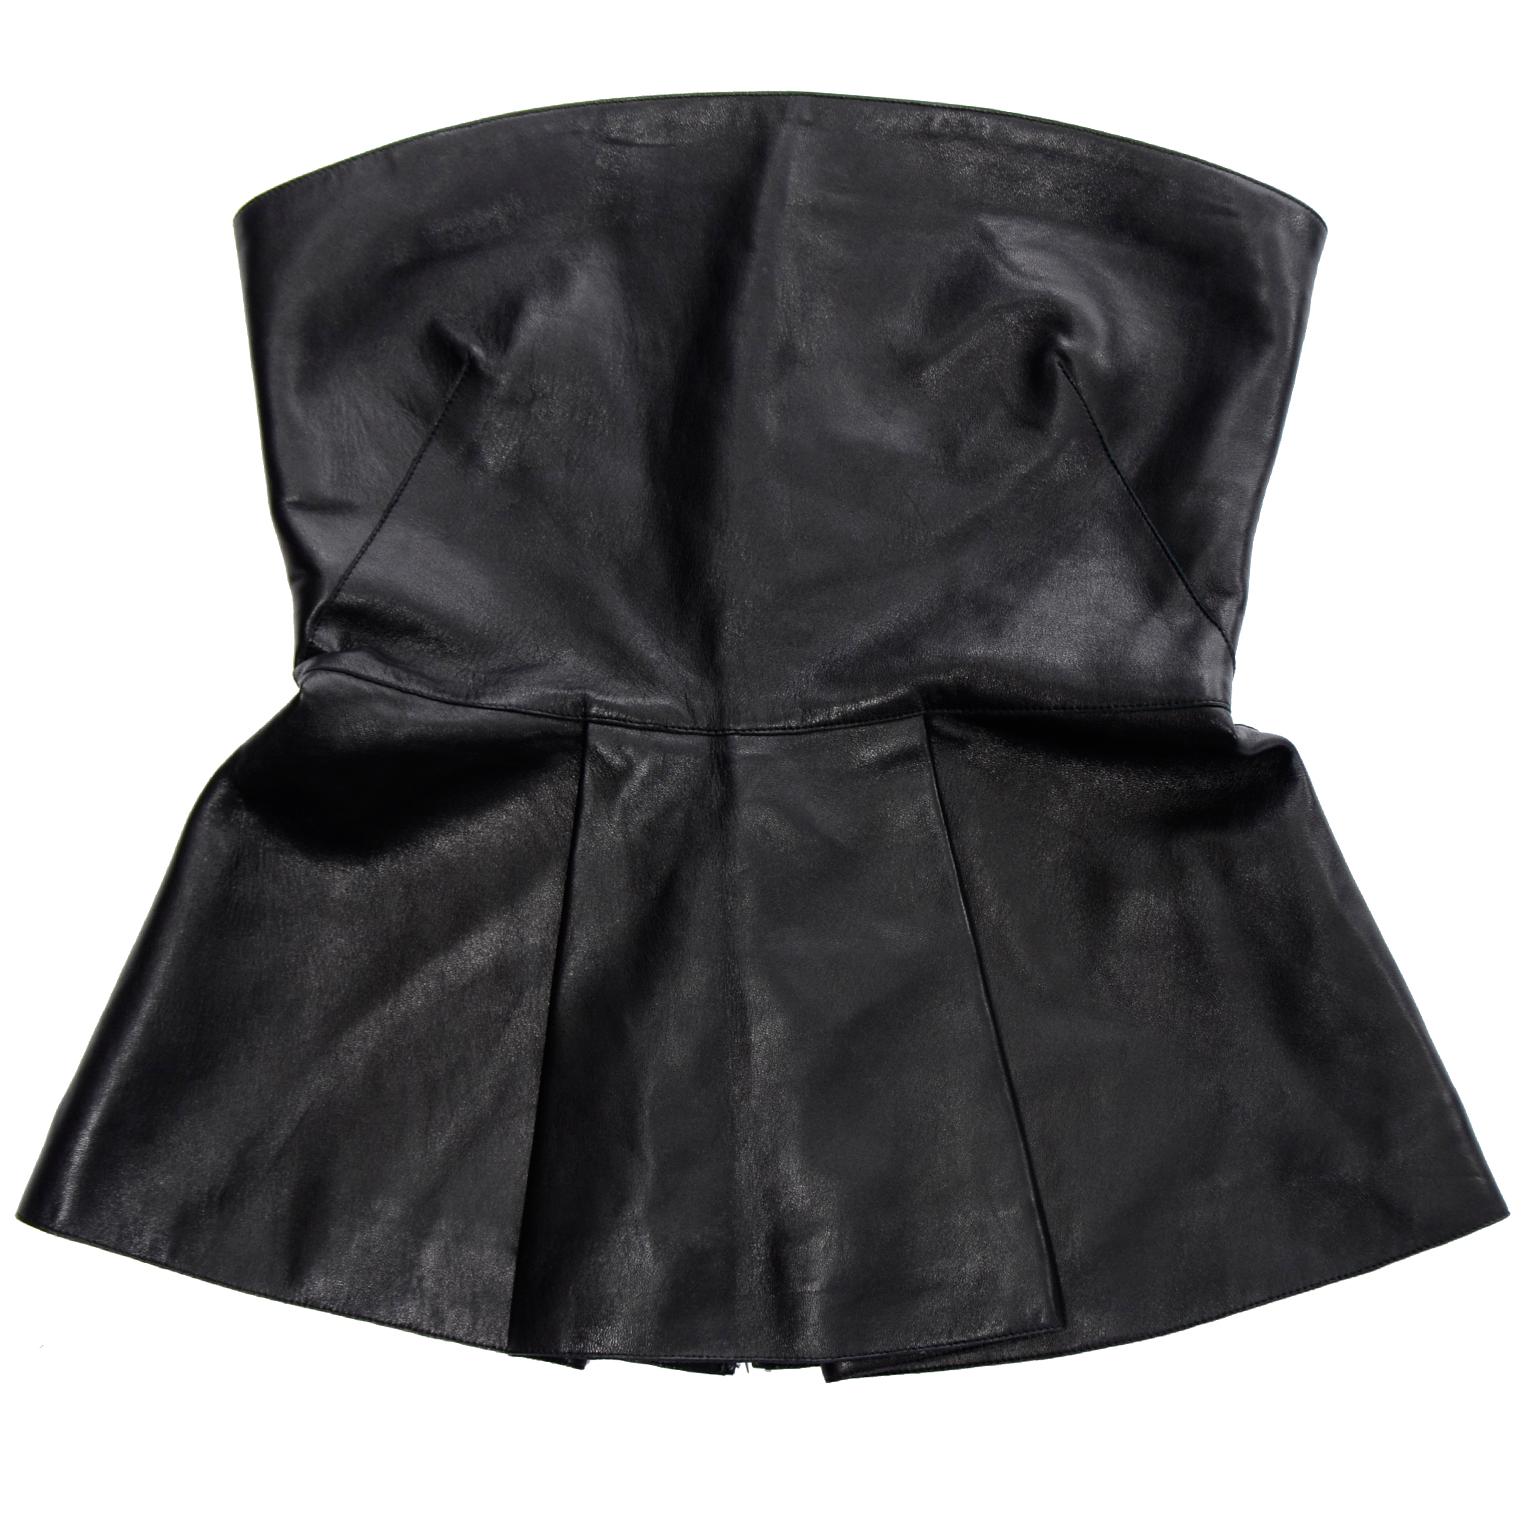 Valentino Black Leather Strapless Bustier Peplum Top In Excellent Condition For Sale In Portland, OR